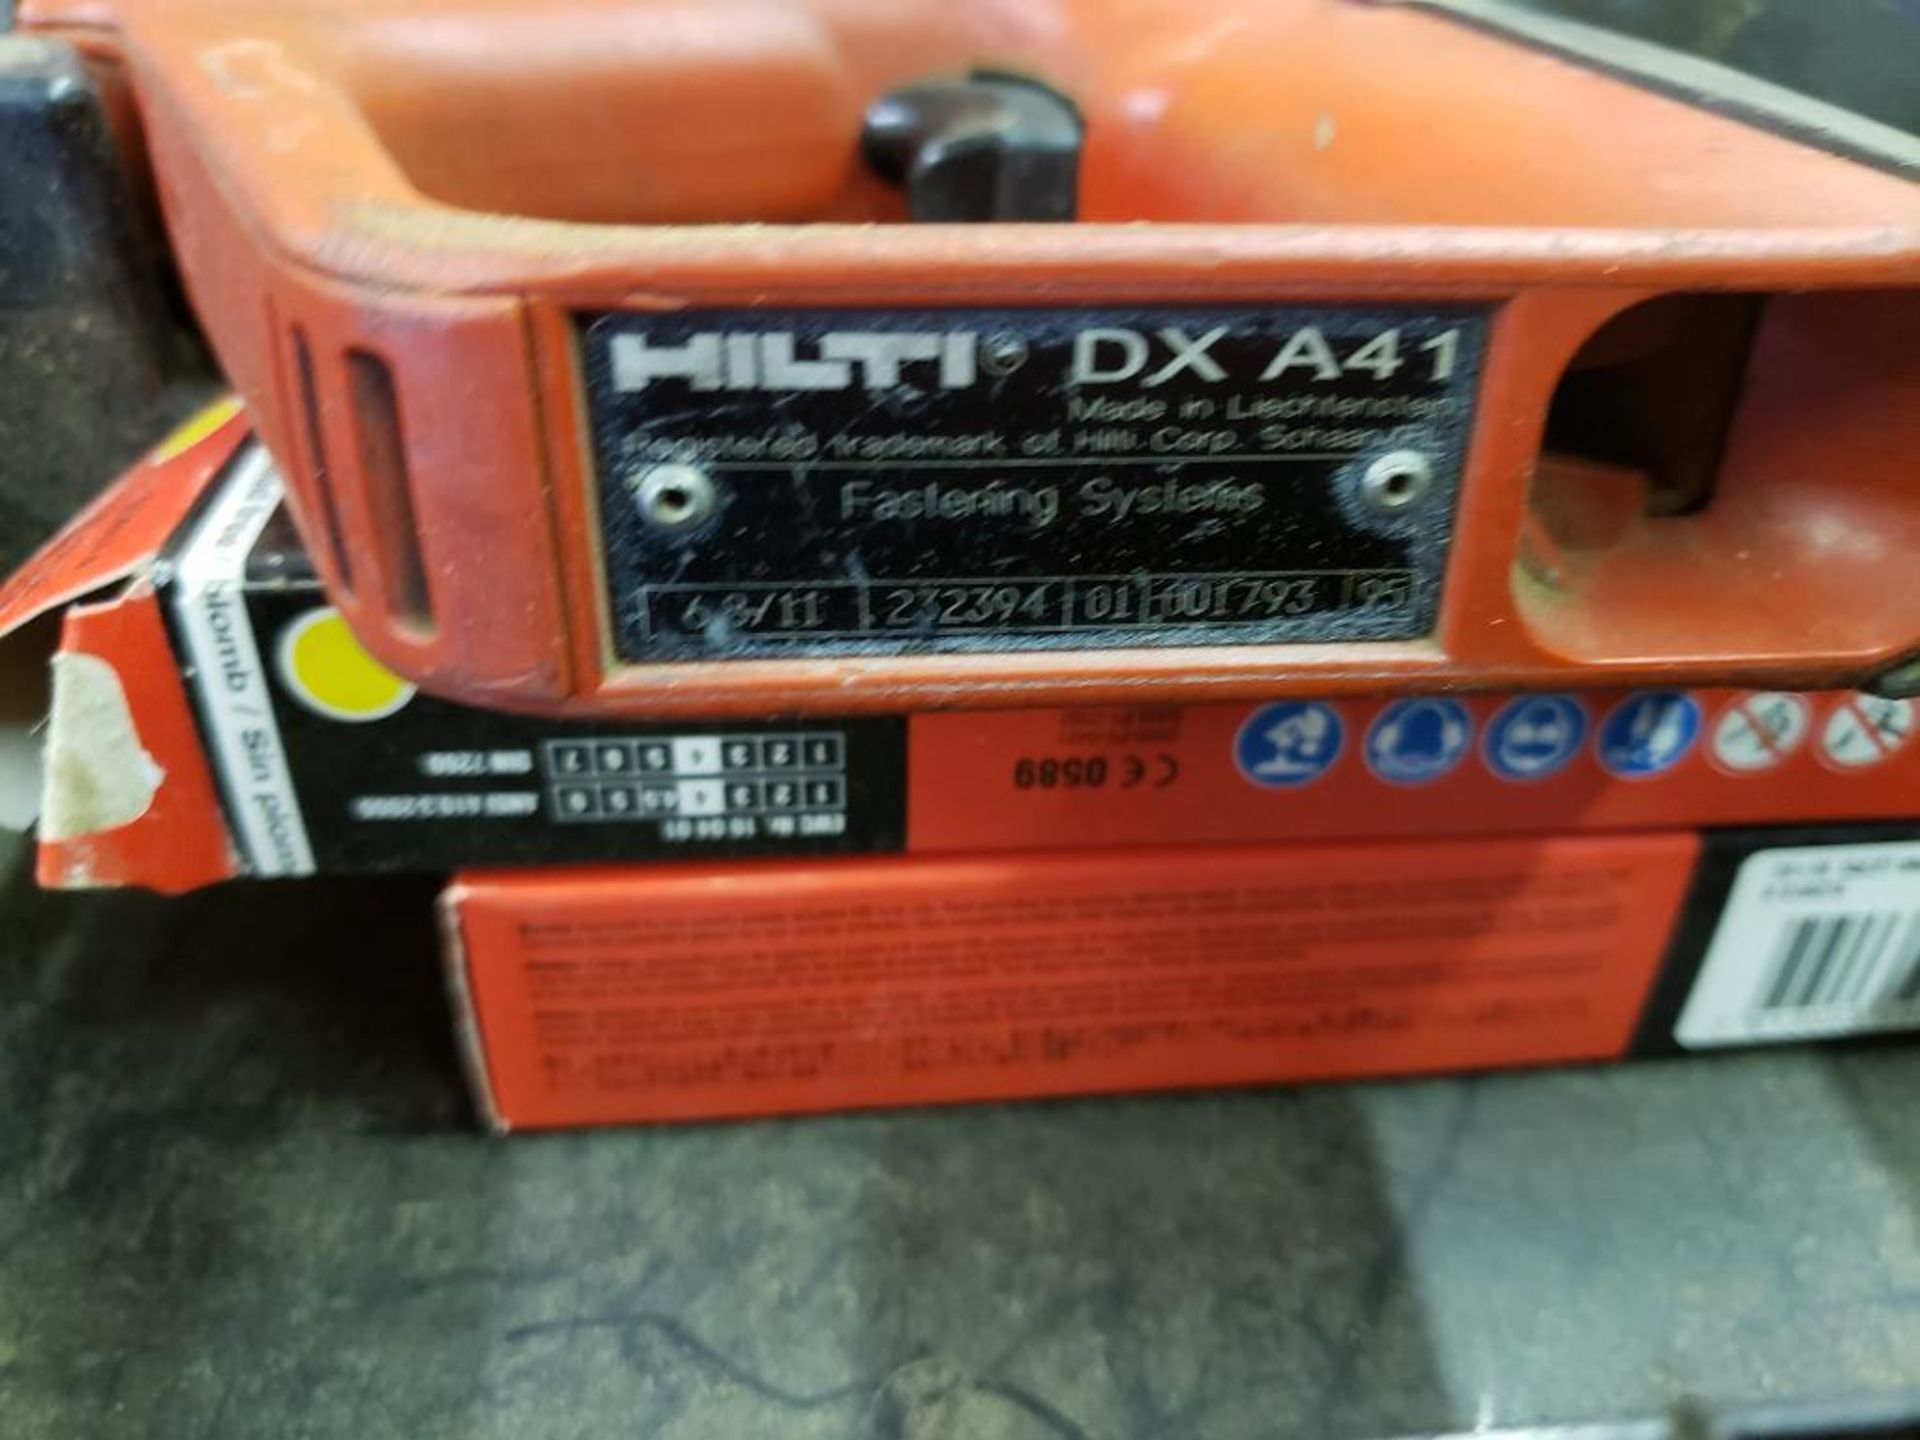 Hilti DXA41 powder actuated tool, with MX72 magazine. - Image 6 of 9